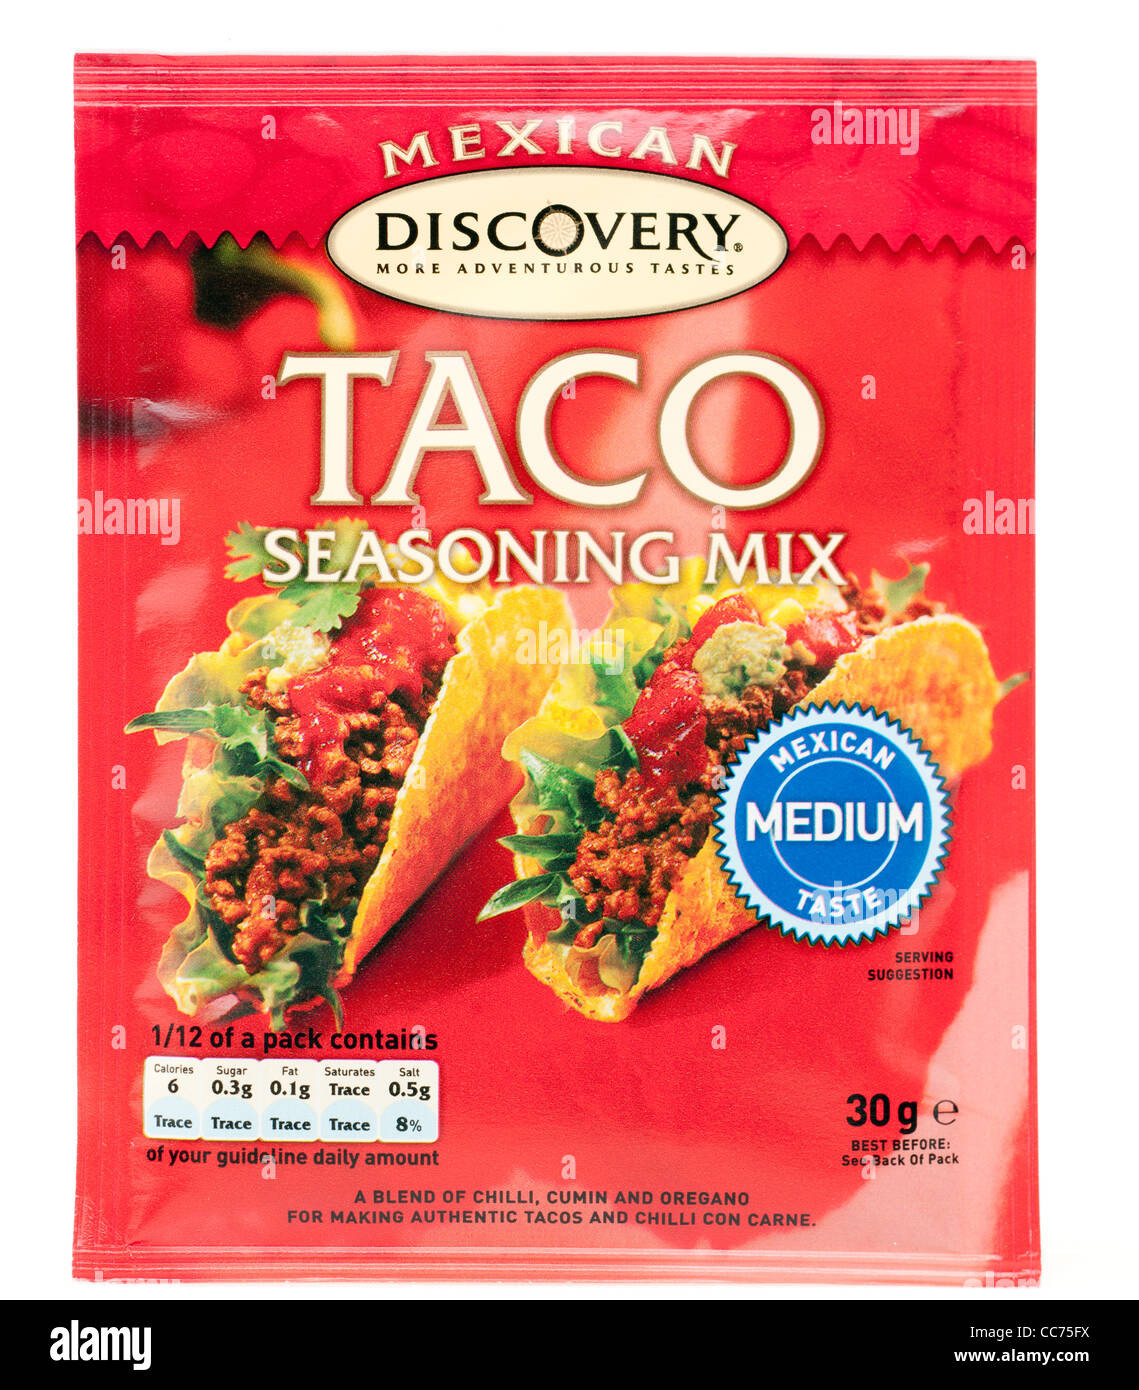 Packet of Mexican discovery Taco seasoning mix Stock Photo